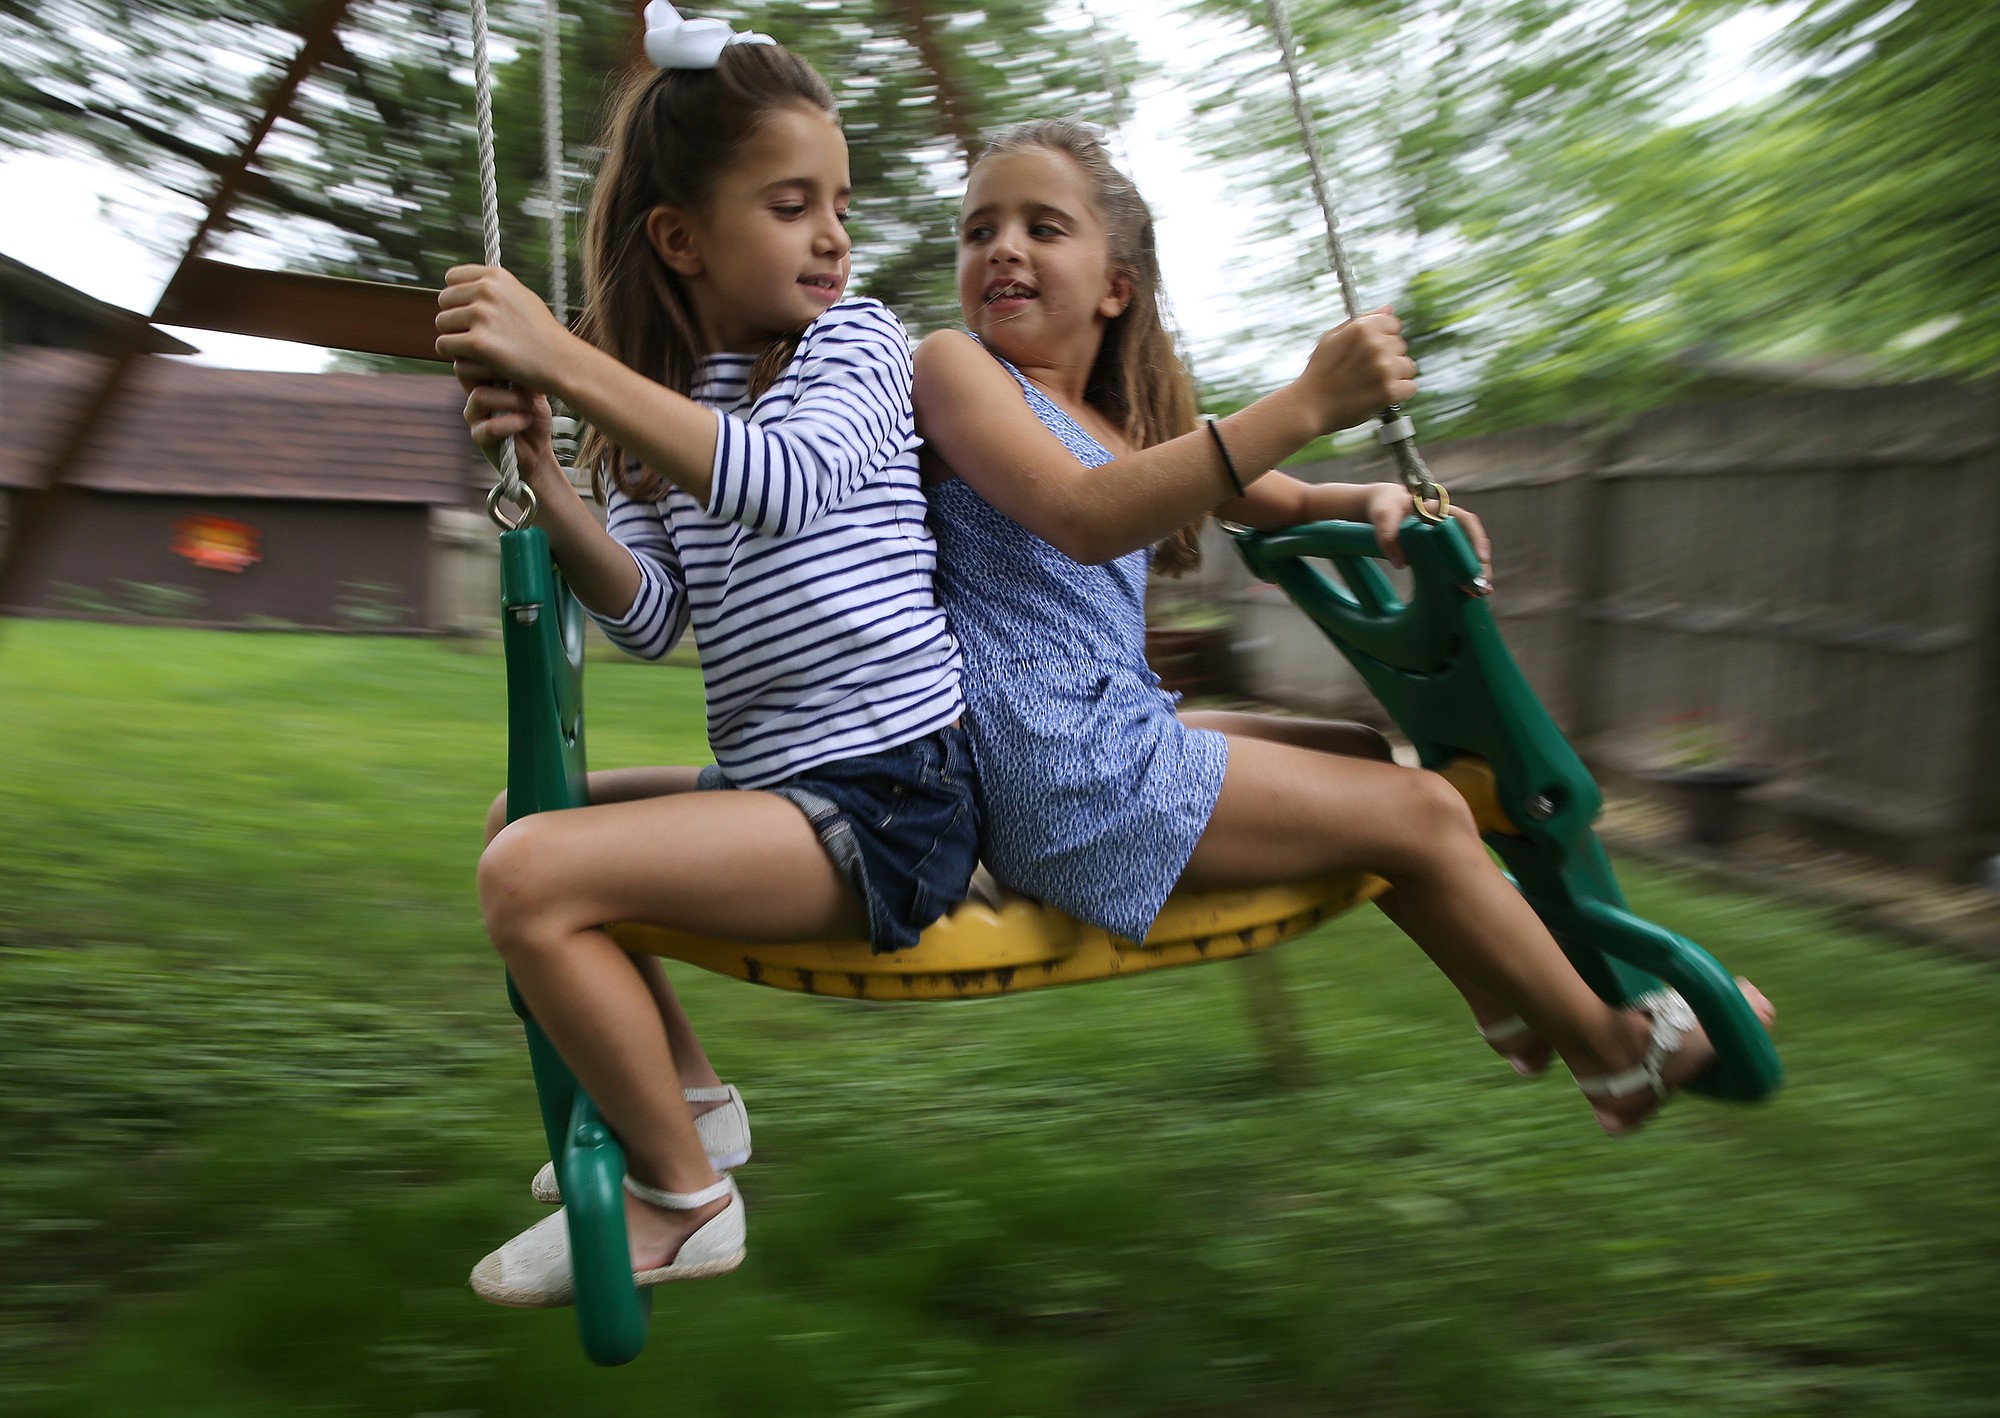 Sophia Moreno, who suffers from allergies and asthma, left, and her twin sister, Isabella, play together in the backyard of their home on June 25 in Shorewood, Ill.